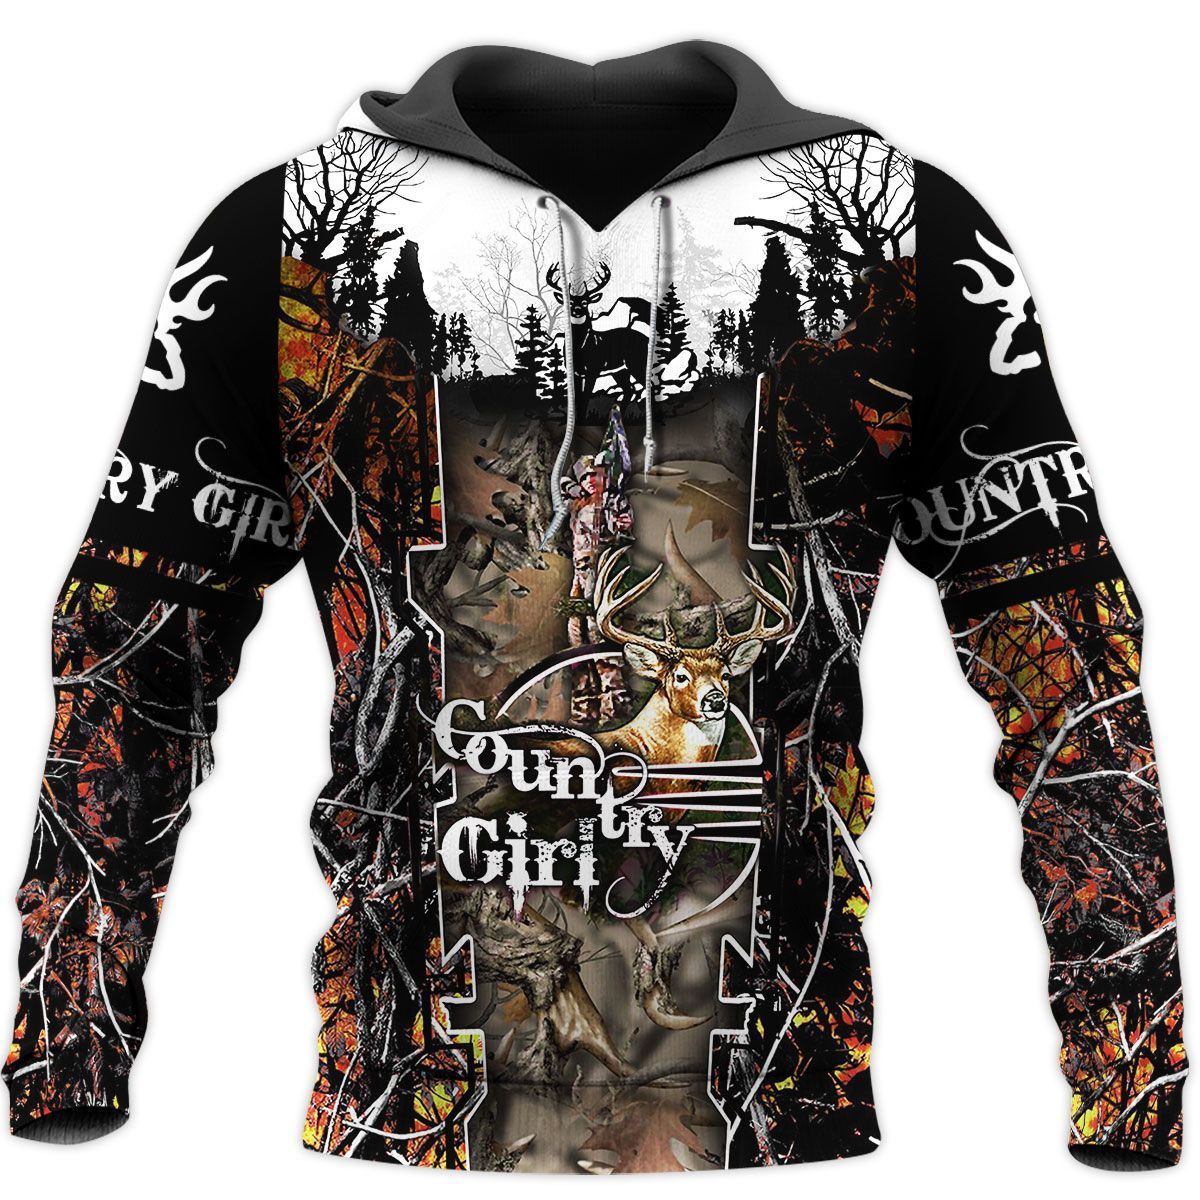 164THHHT-DEER HUNTING COUNTRY GIRL 3D ALL OVER PRINT